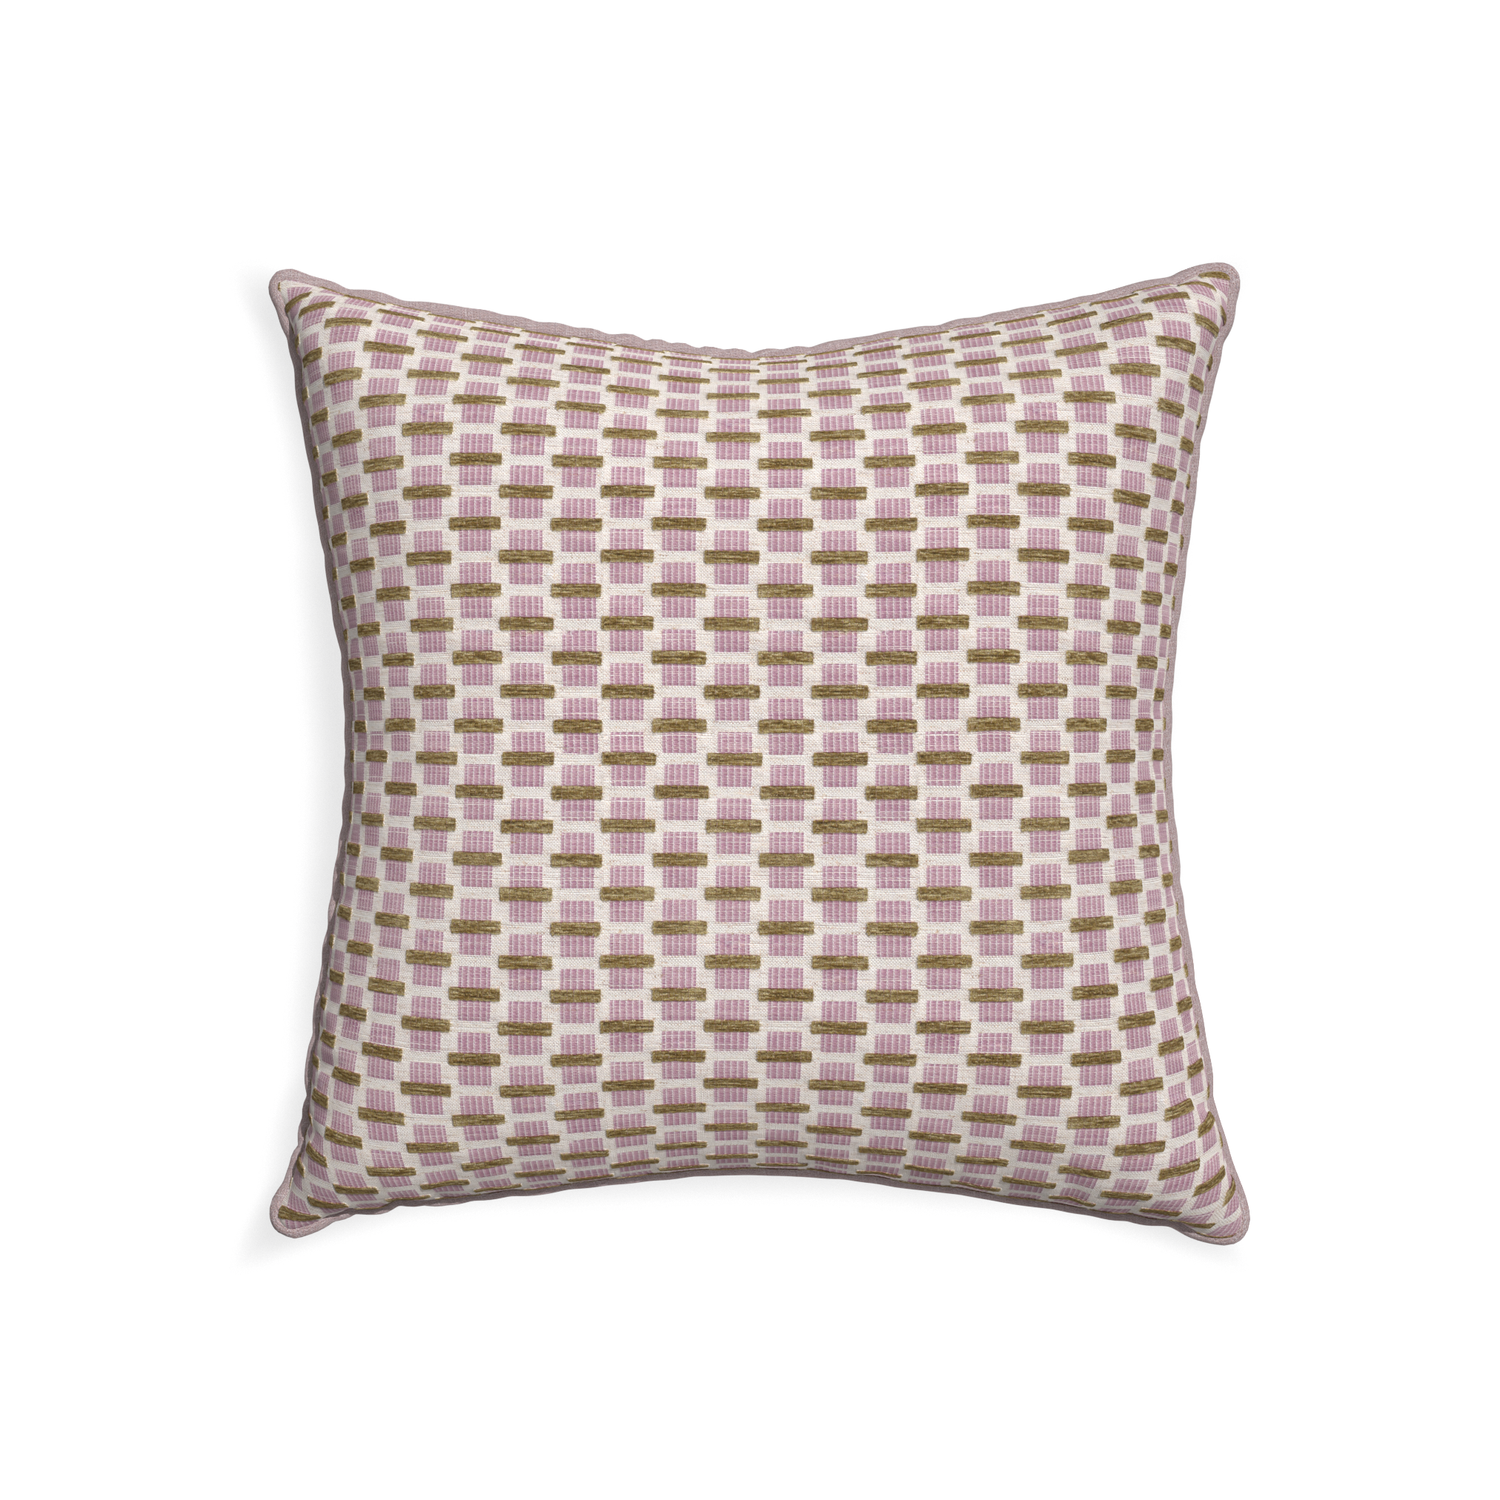 22-square willow orchid custom pink geometric chenillepillow with orchid piping on white background